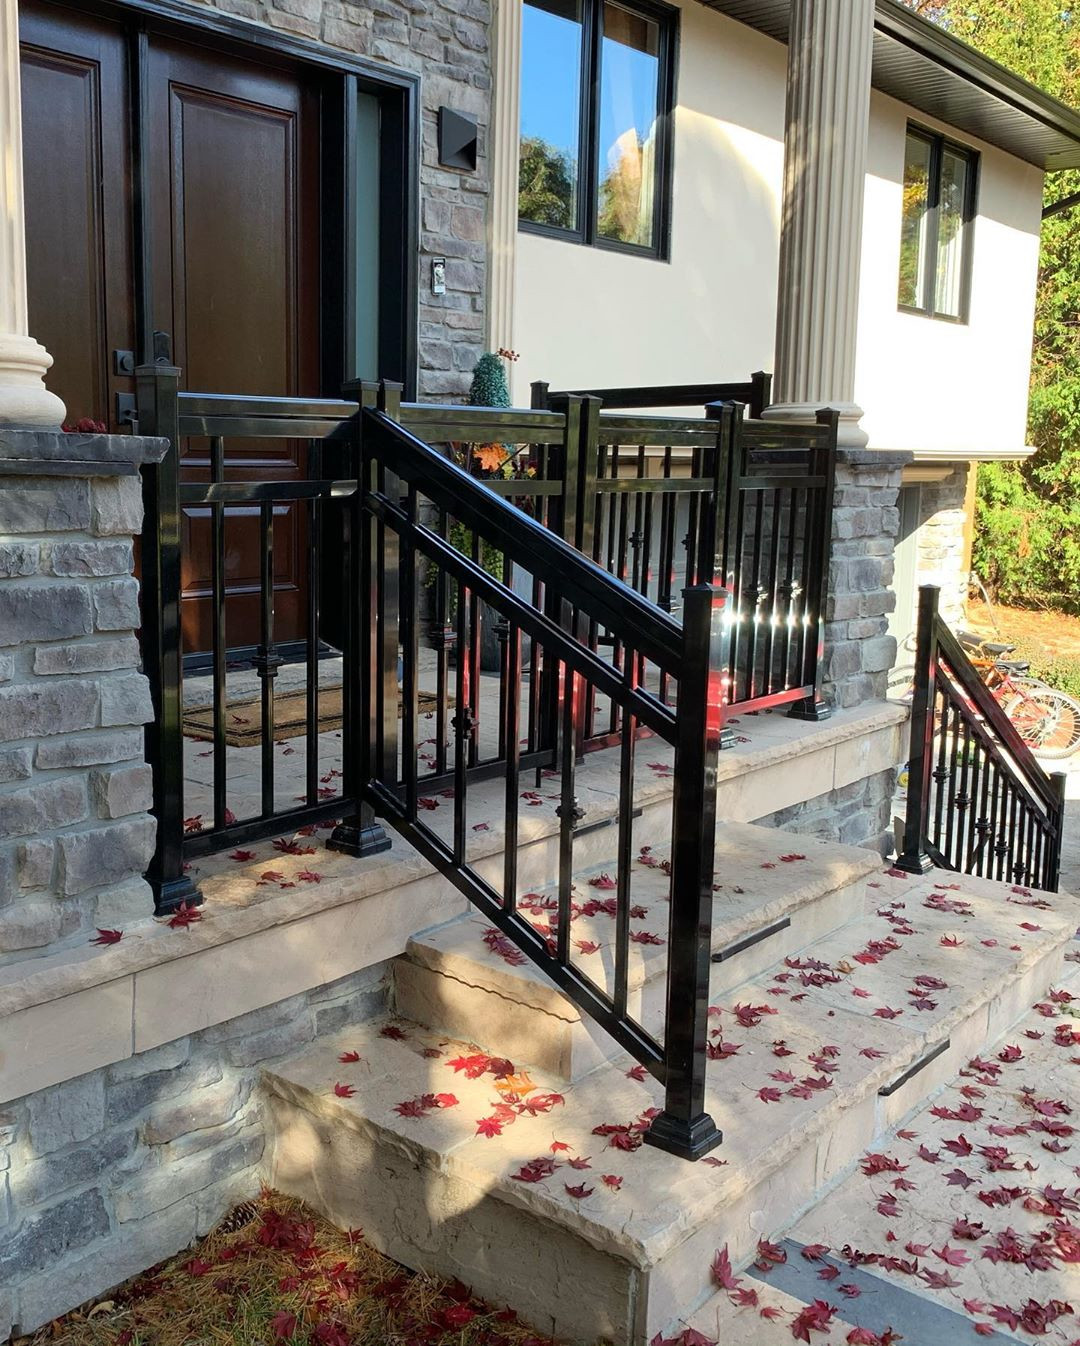 40+ Porch Railing Ideas You Can Build Yourself,vinyl porch railing ideas,cheap porch railing ideas,farmhouse front porch railing ideas